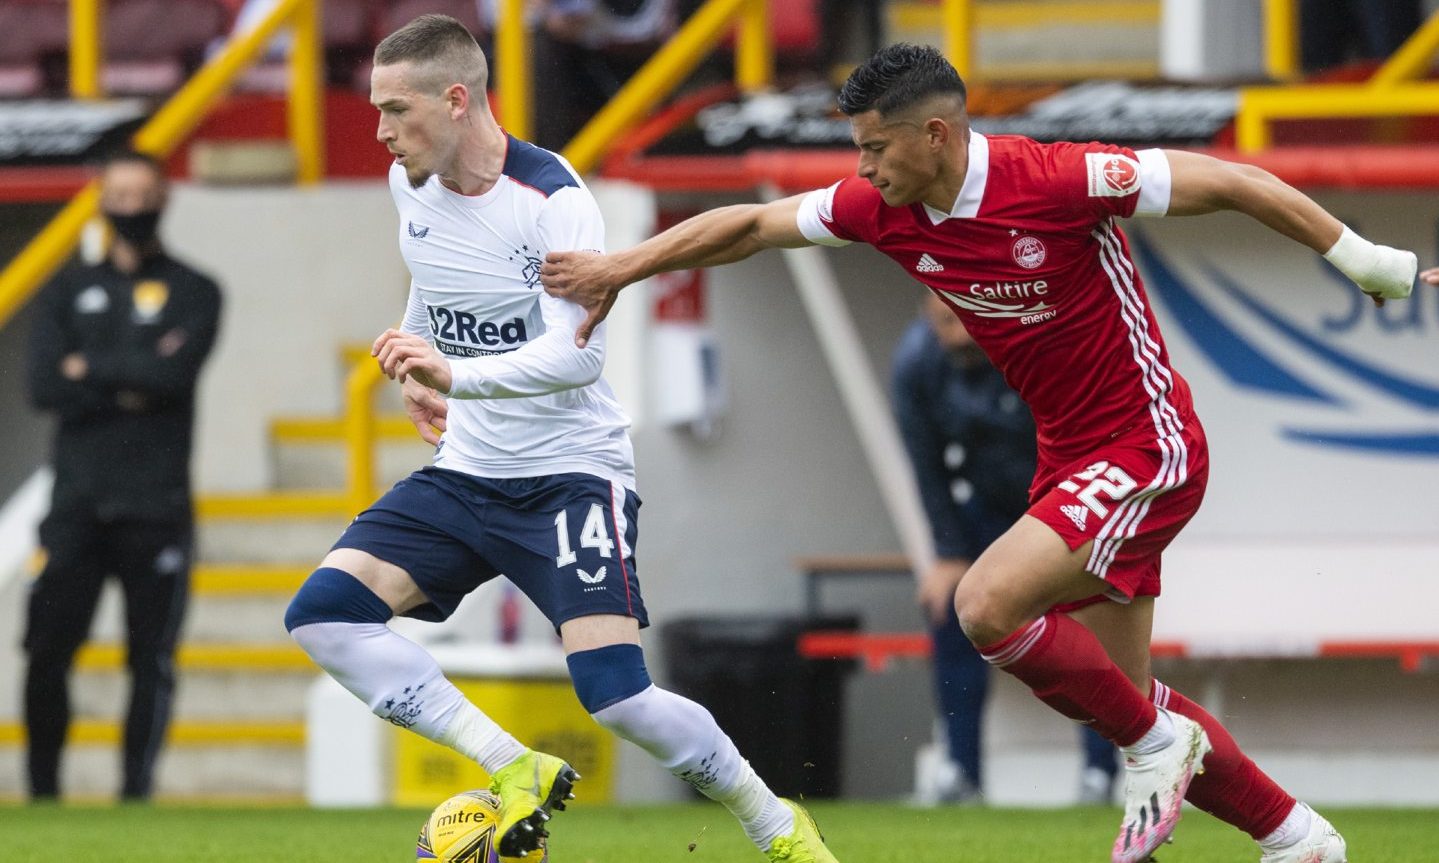 Rangers' Ryan Kent holds off Aberdeen's Ronald Hernandez during the Scottish Premiership match between Aberdeen and Rangers at Pittodrie on August 1.